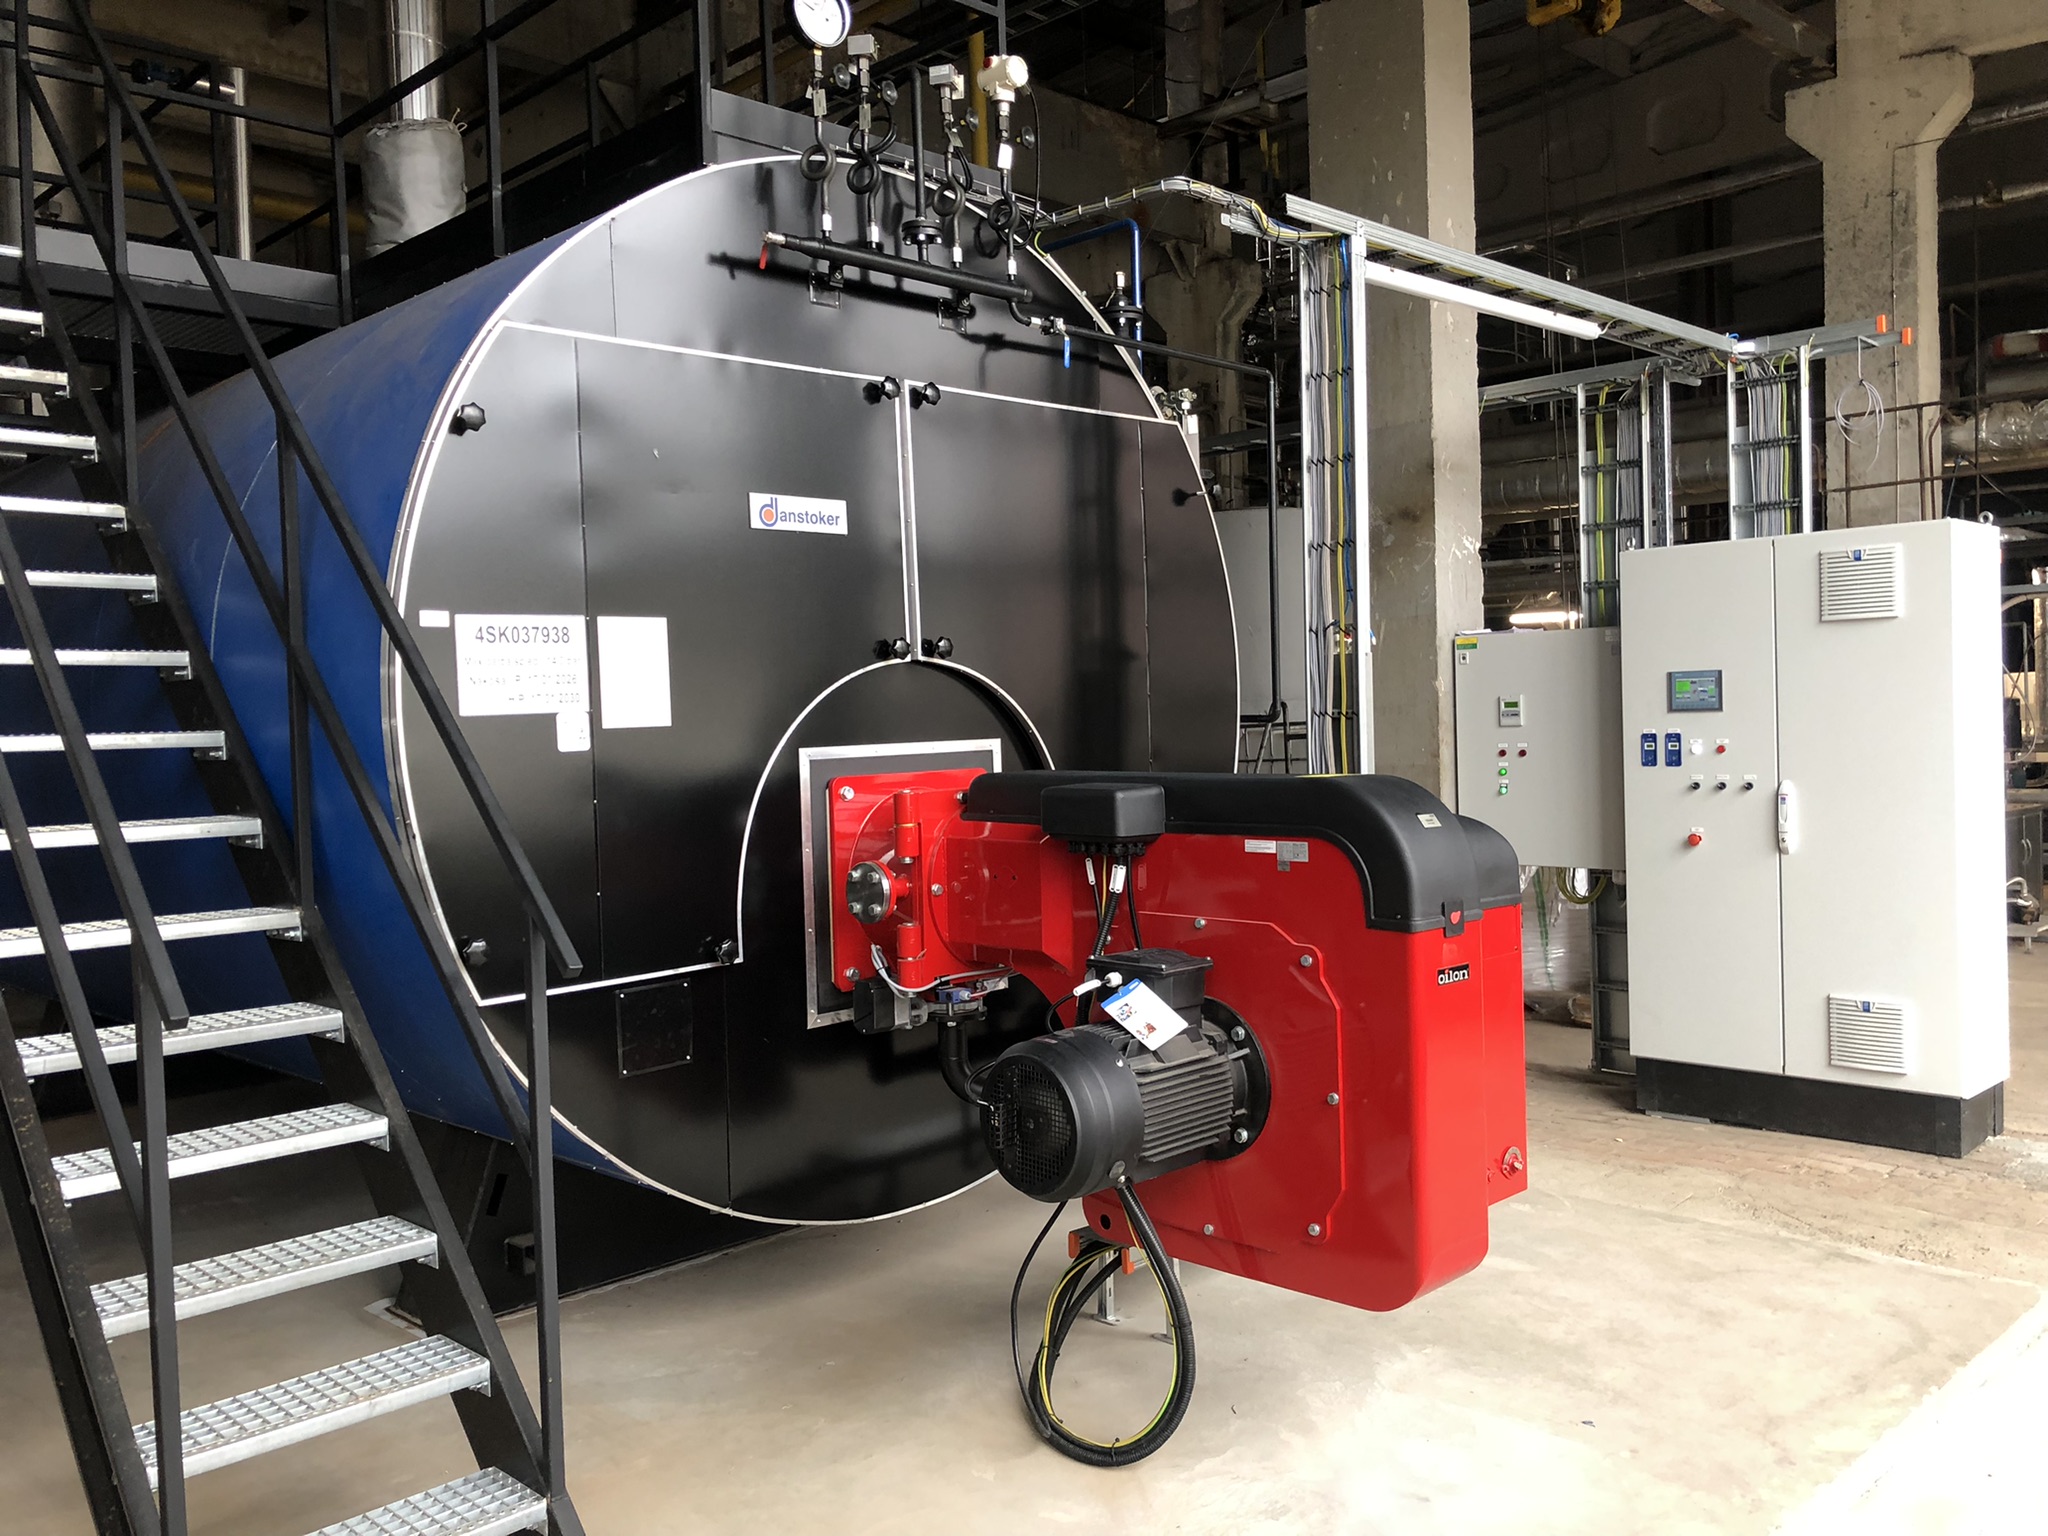 7.5 t/h steam boiler installation for dairy industry